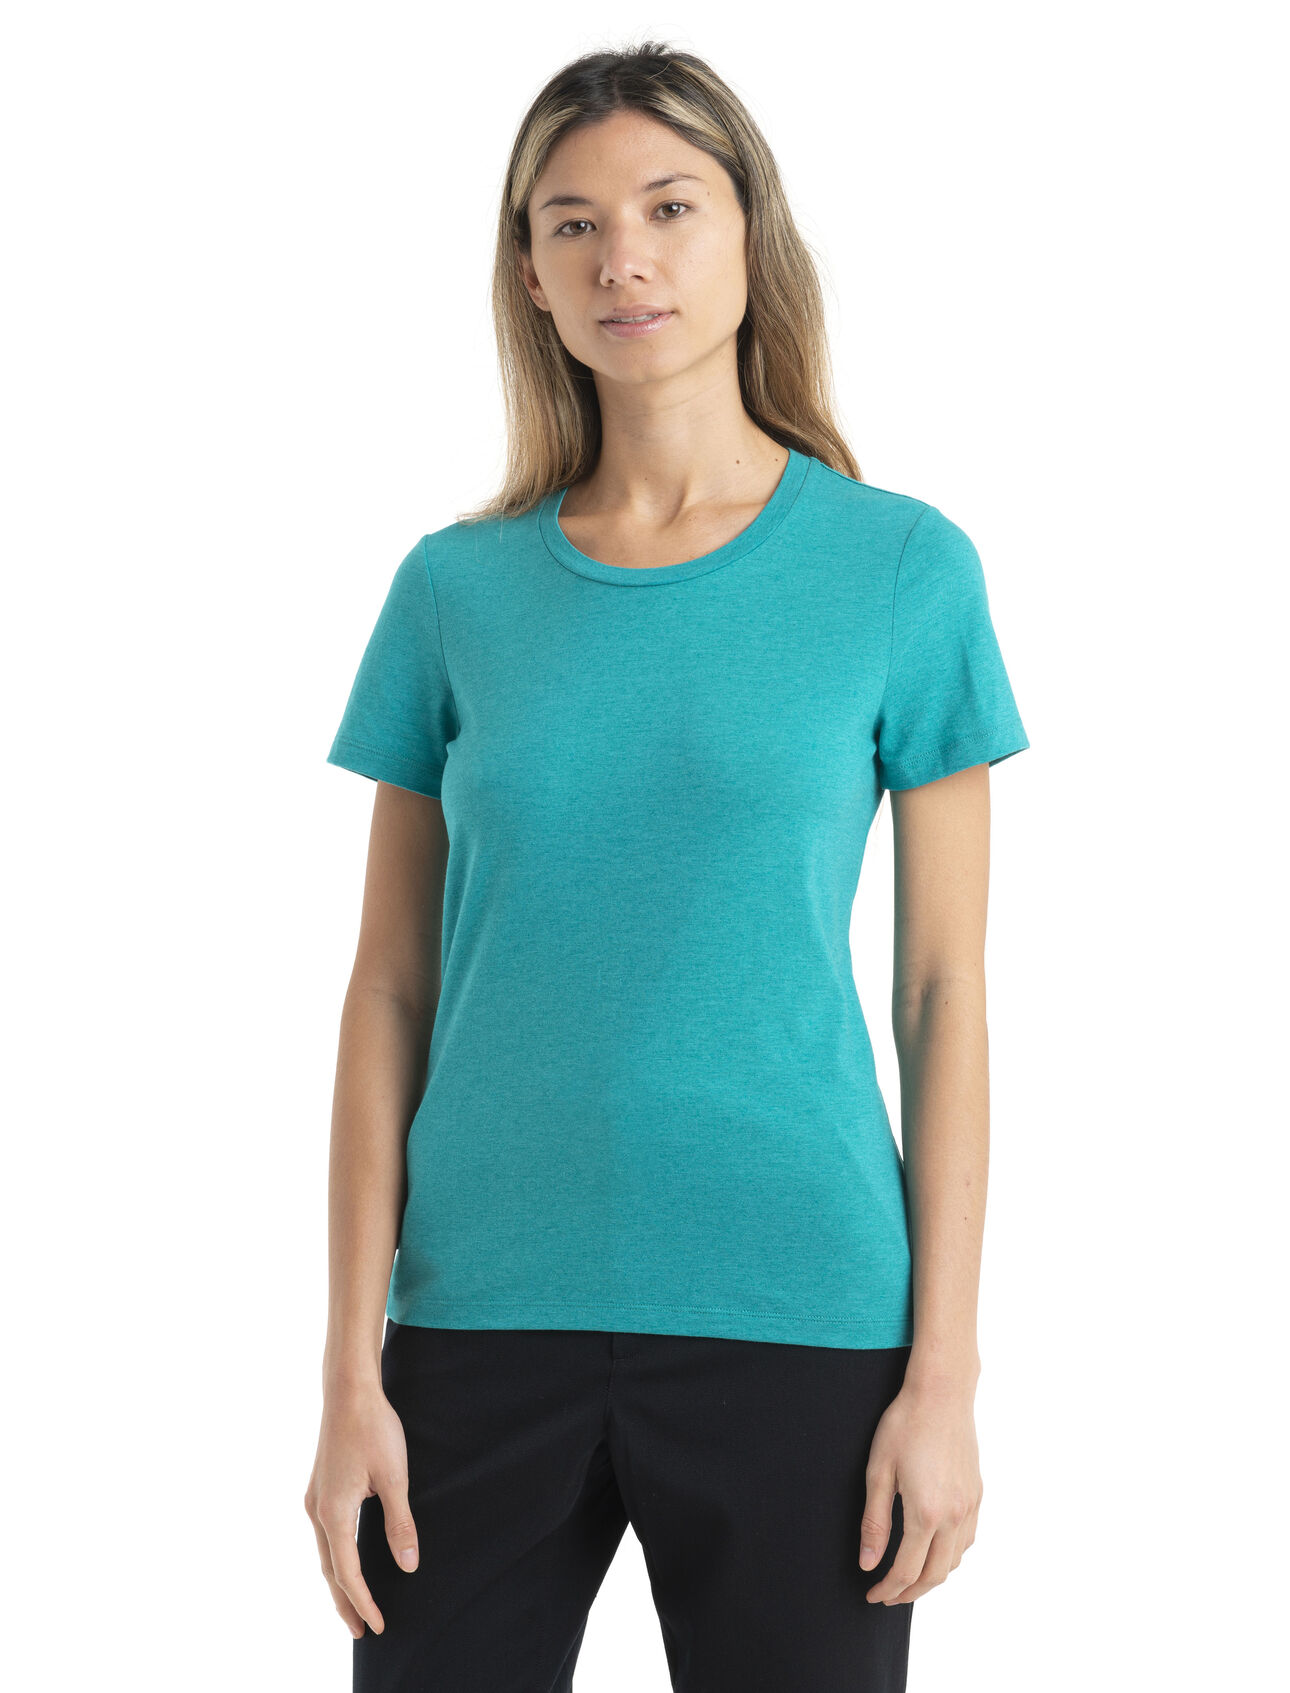 Womens Merino Central Classic Short Sleeve T-Shirt A versatile, everyday tee that goes anywhere in comfort, the Central Classic Short Sleeve Tee features a sustainable blend of natural merino wool and soft organically grown cotton. 